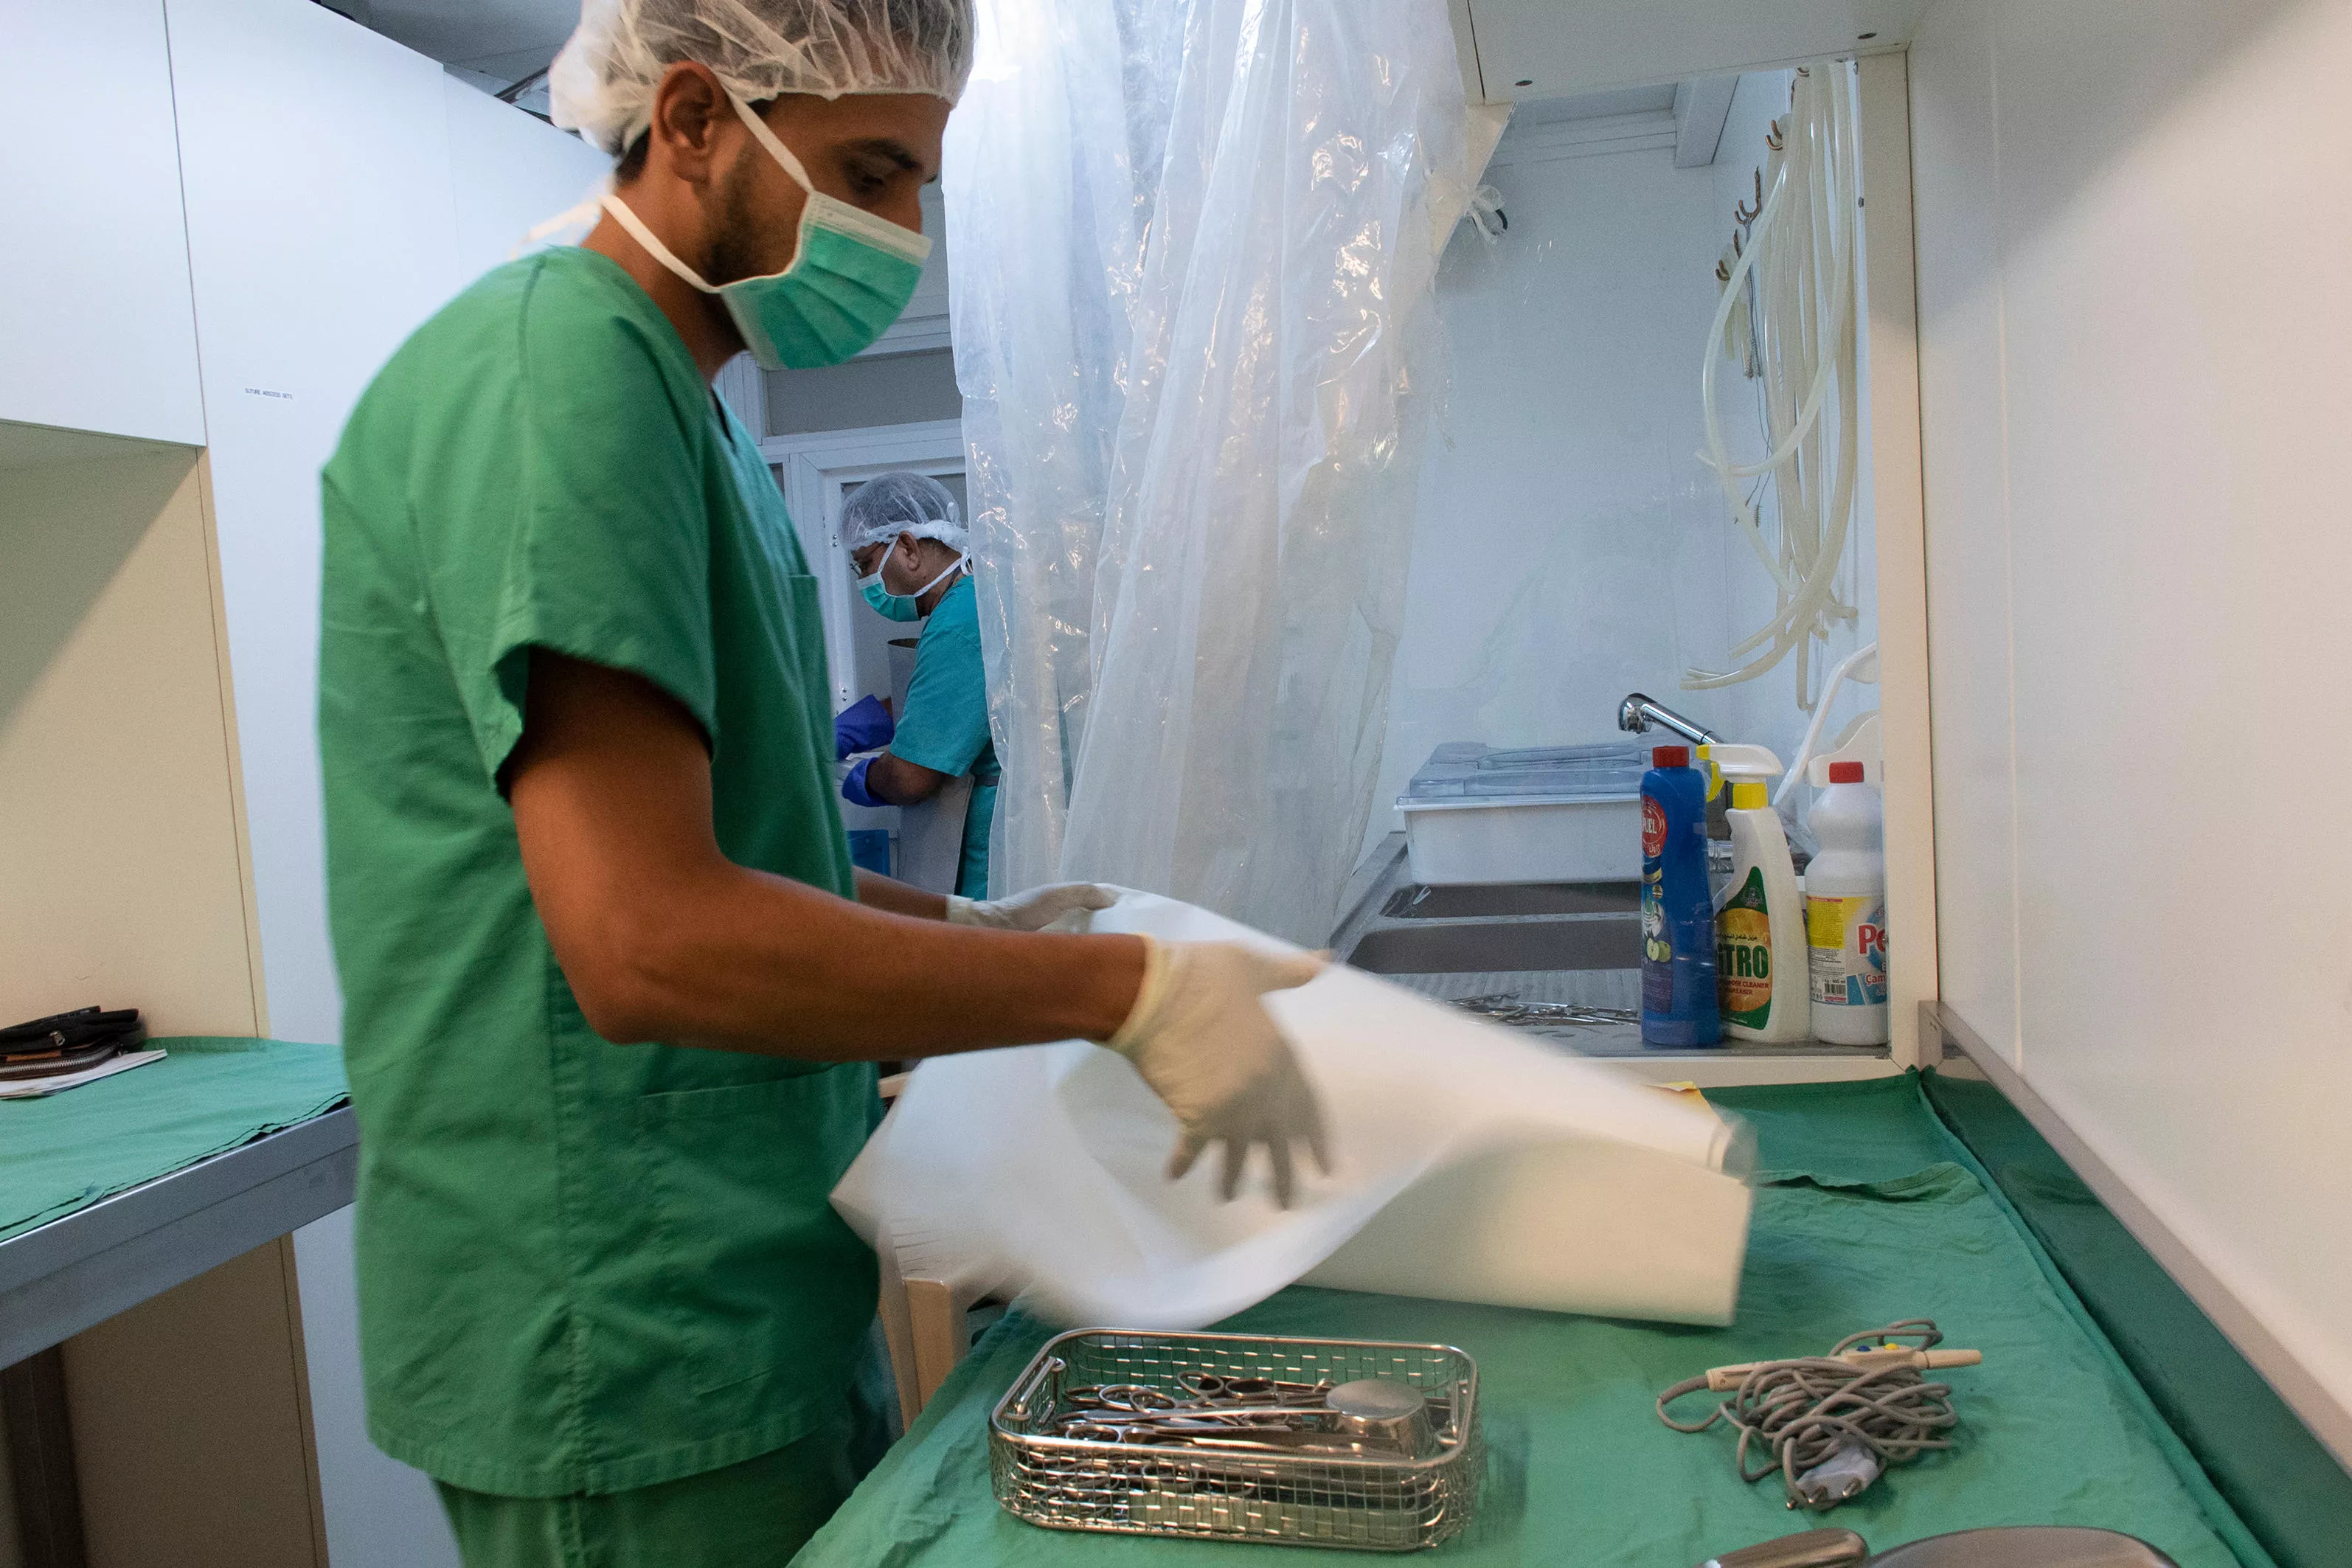 At MSF’s post-operative care hospital in Mosul (Iraq), infection and prevention control (IPC) measures are implemented. One of the pillars of IPC consists in cleaning, sterilizing and sanitizing. Here, an MSF nurse is preparing equipment prior to a surgery.